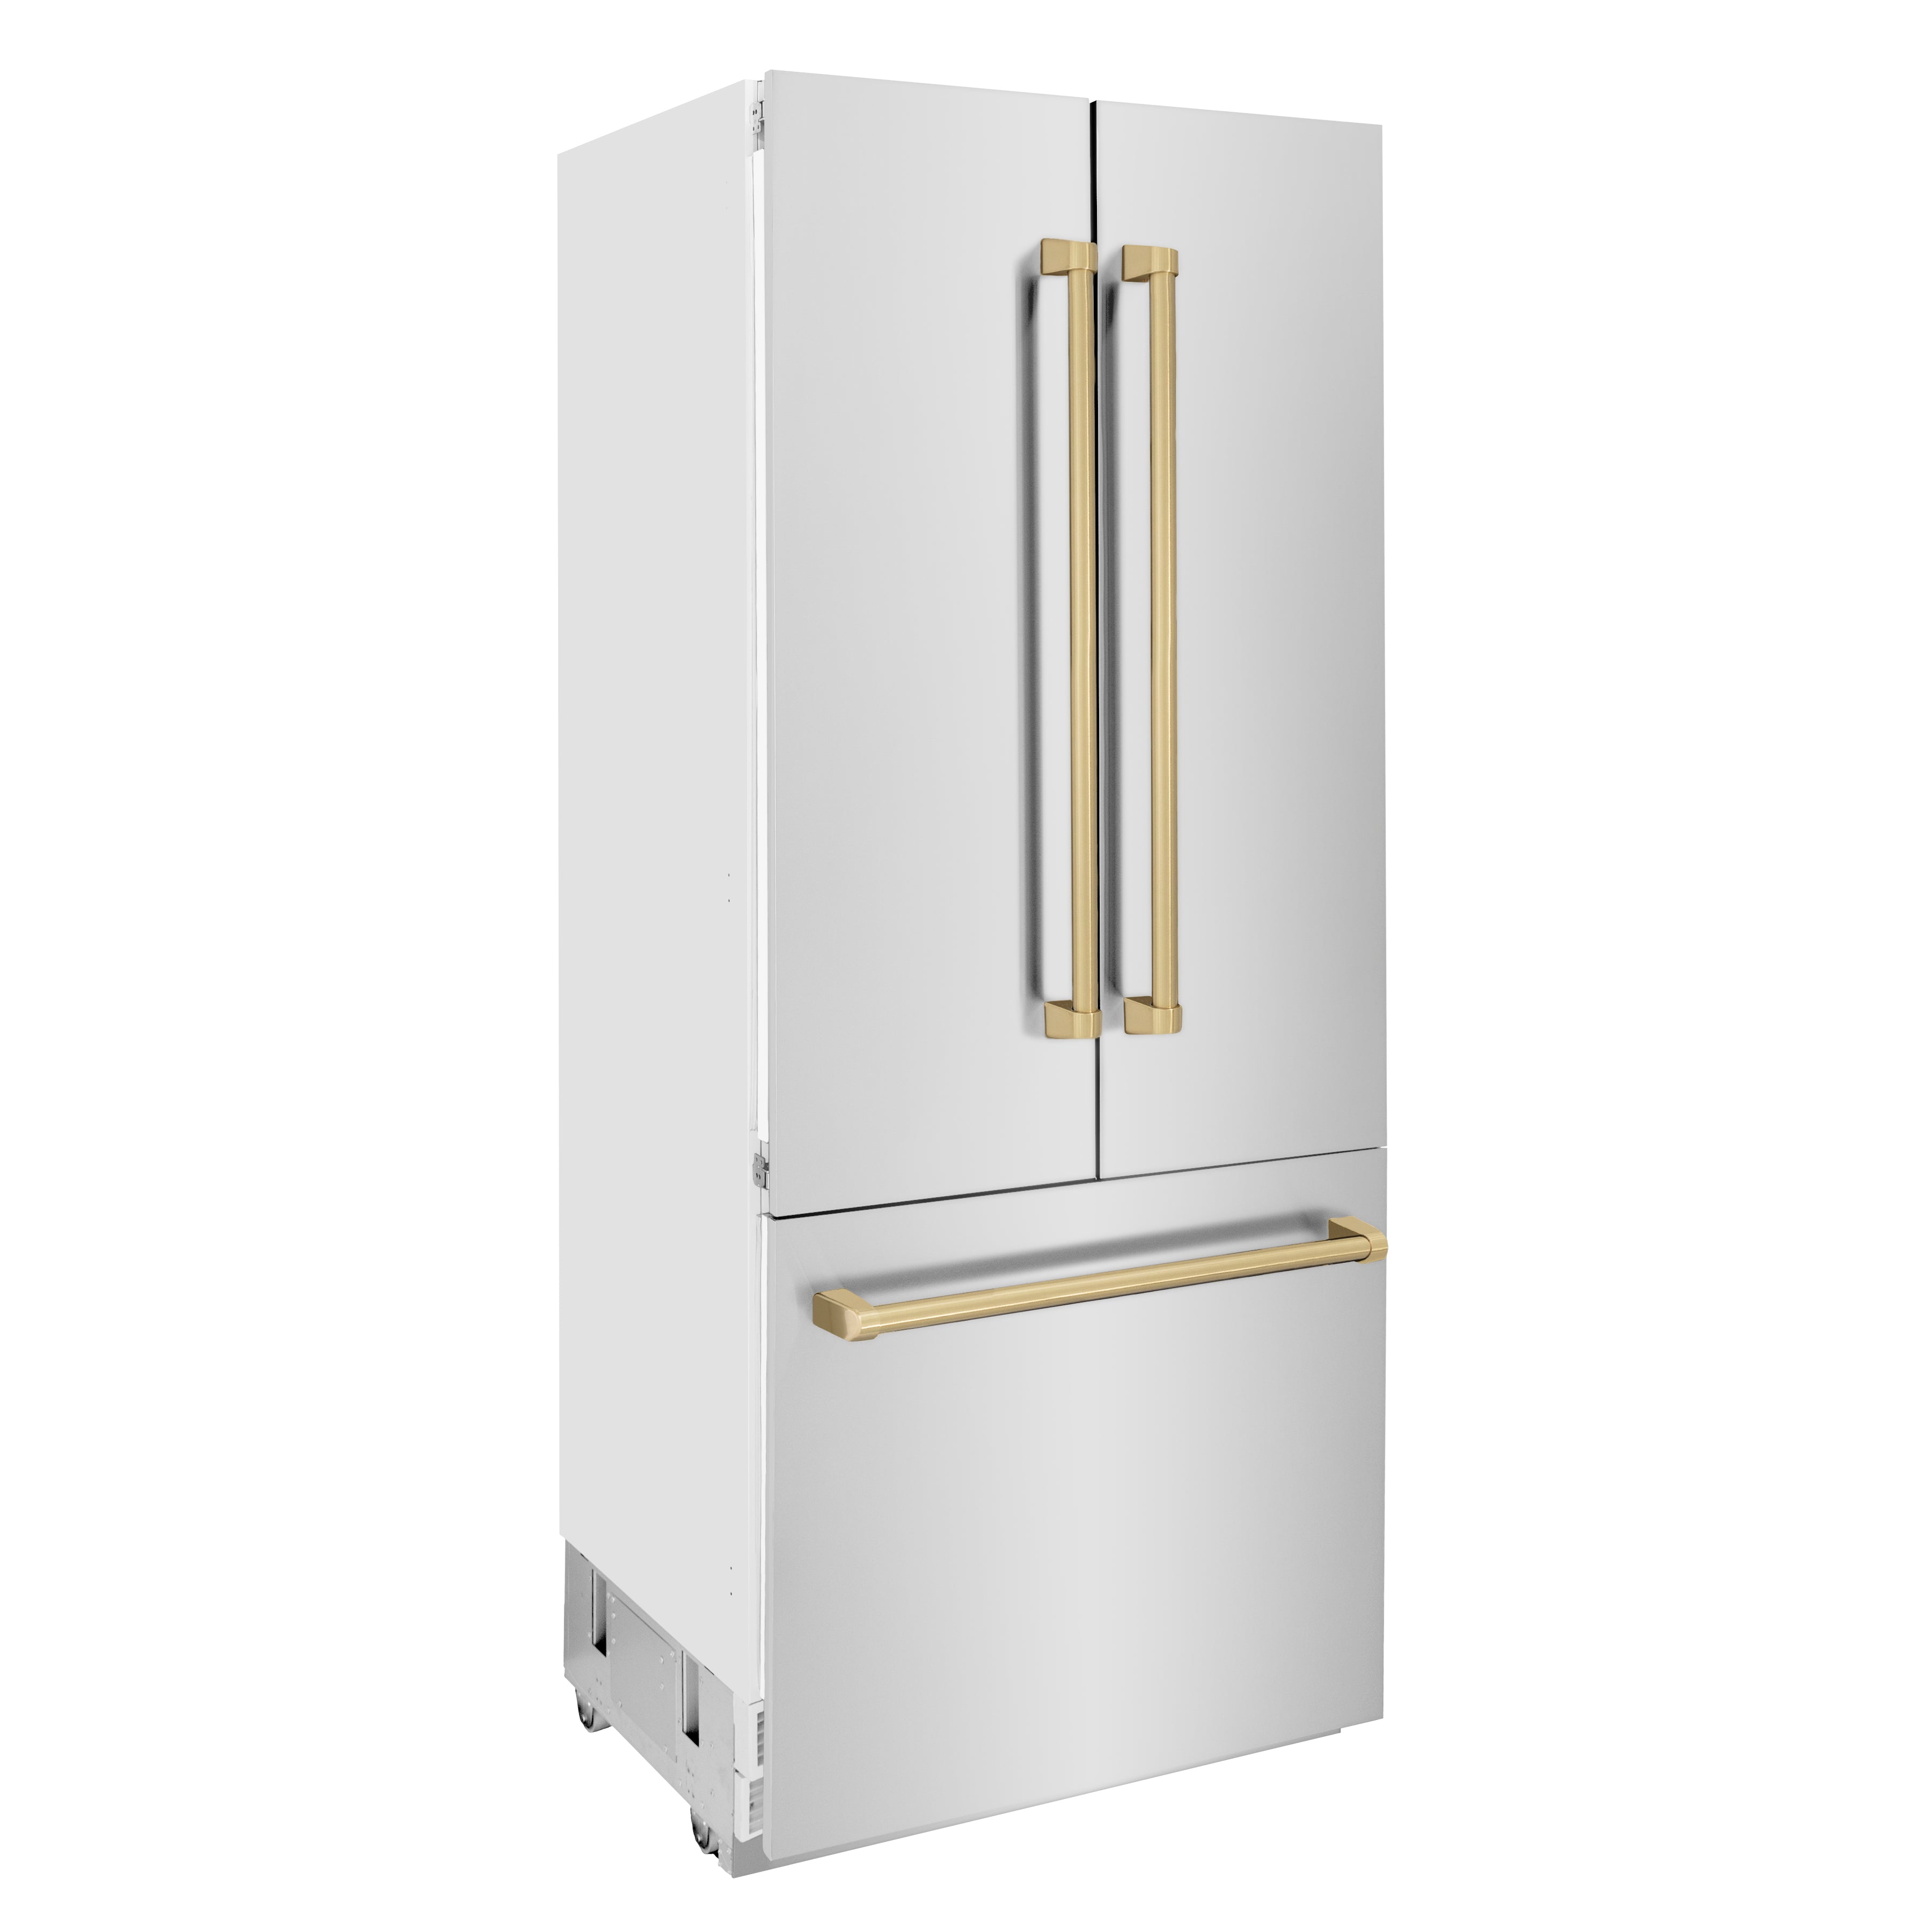 ZLINE 36” Autograph Edition 19.6 cu. ft. Built-in 3-Door French Door Refrigerator with Internal Water and Ice Dispenser in Stainless Steel with Champagne Bronze Accents